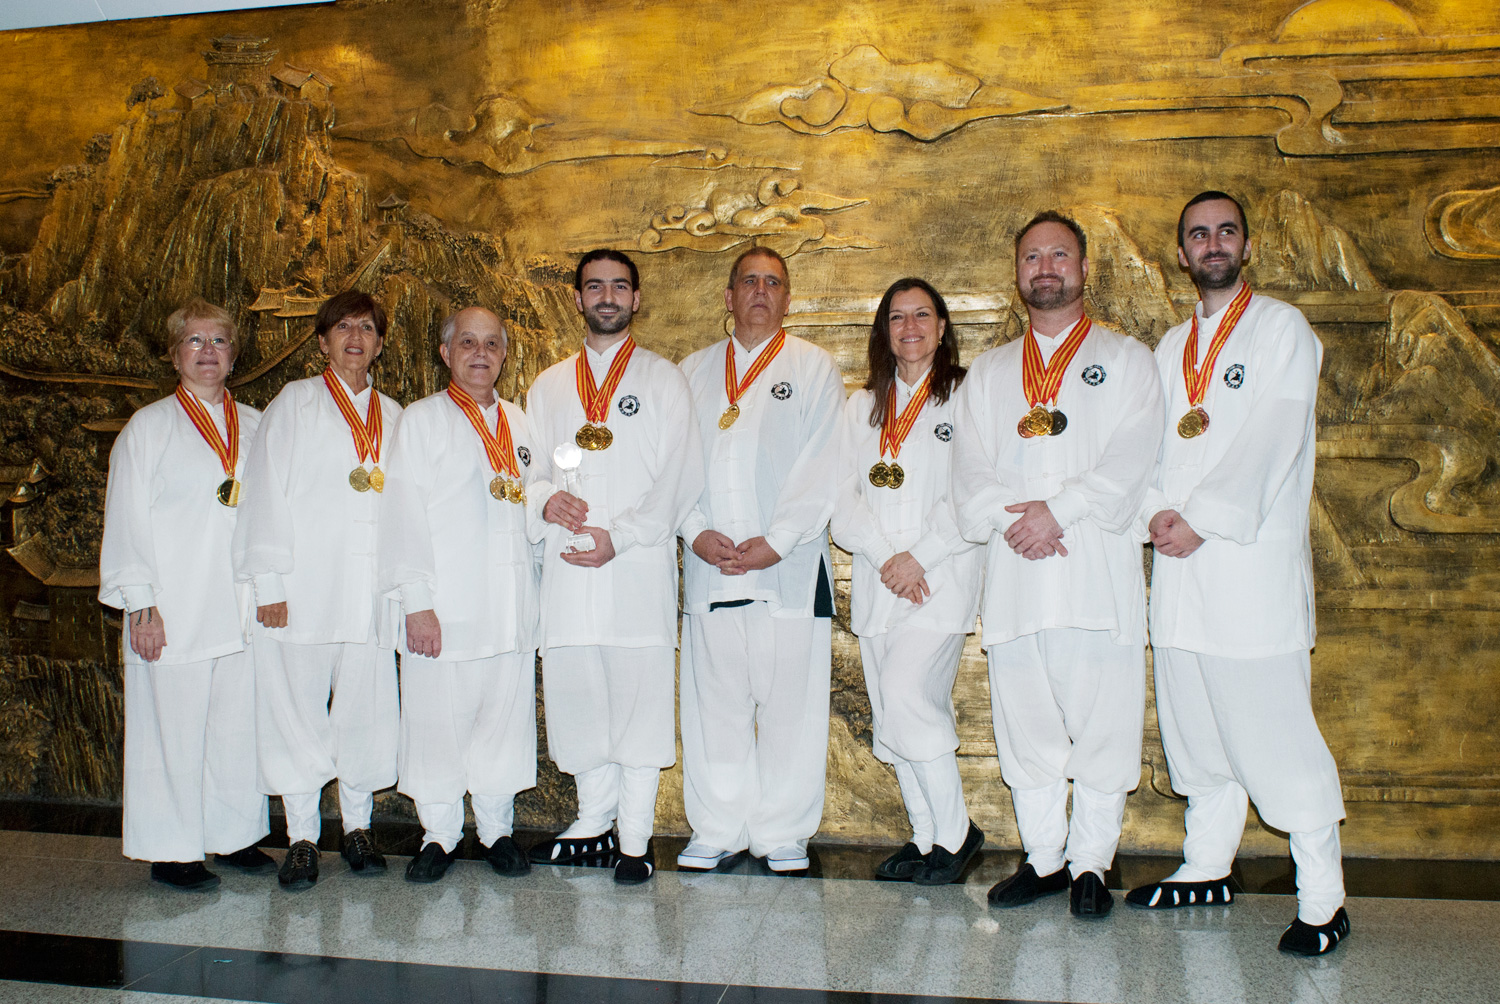 Jan and the team of 8 who went to China, coming home with 2 gold metals in the international competition in the Wudang mountains, 2011